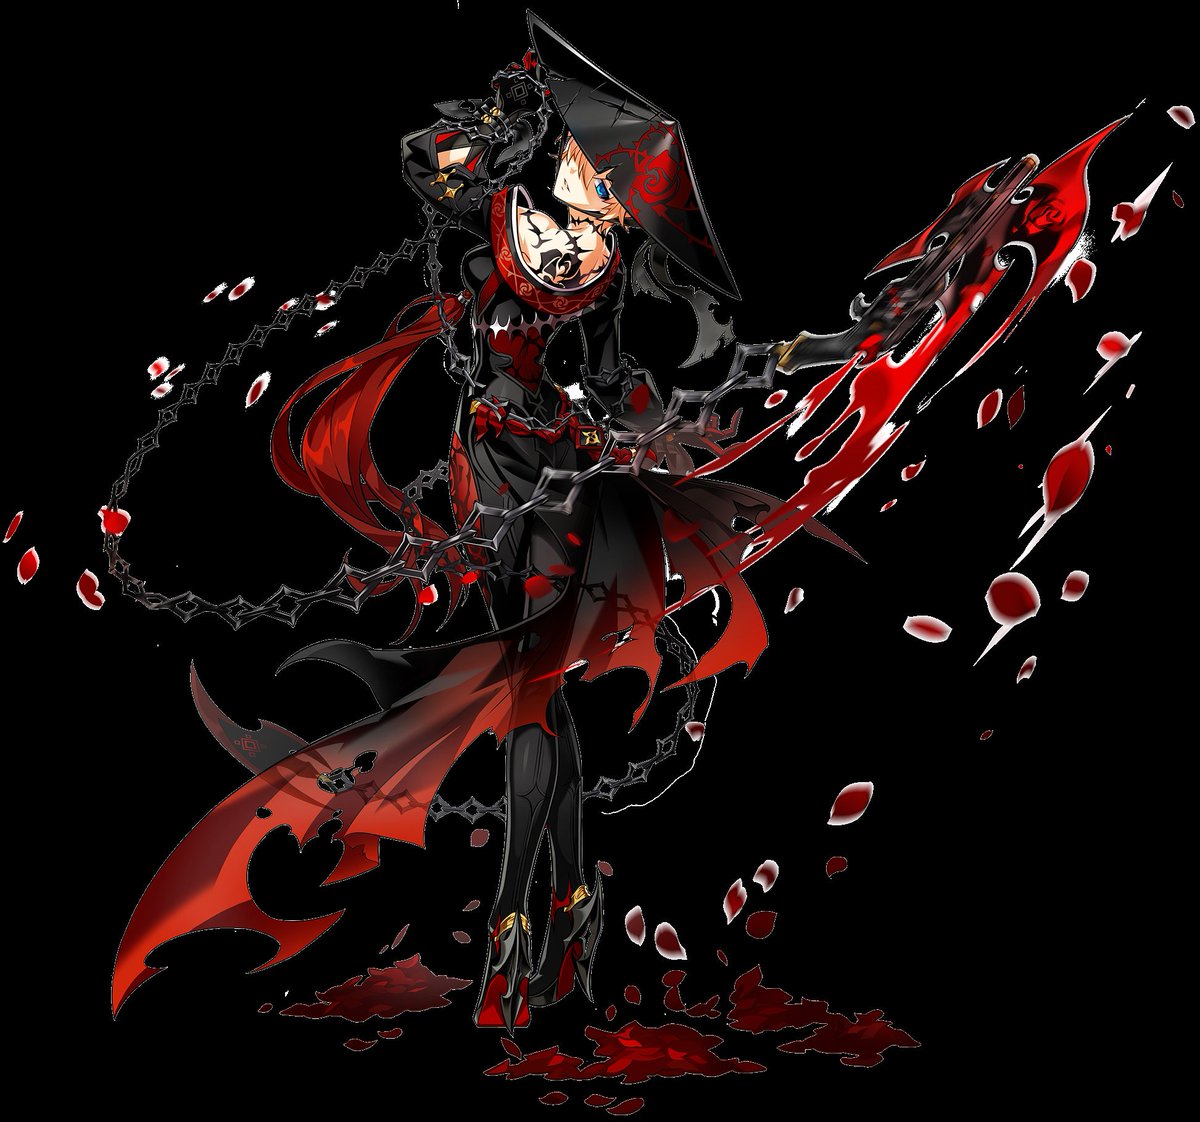 Elsword 3rd Job 3rd Path Reveal With My Life I Will Lead This Battle To Victory Minerva I Know We Have Some Rose Fans Here Show Of Hands How